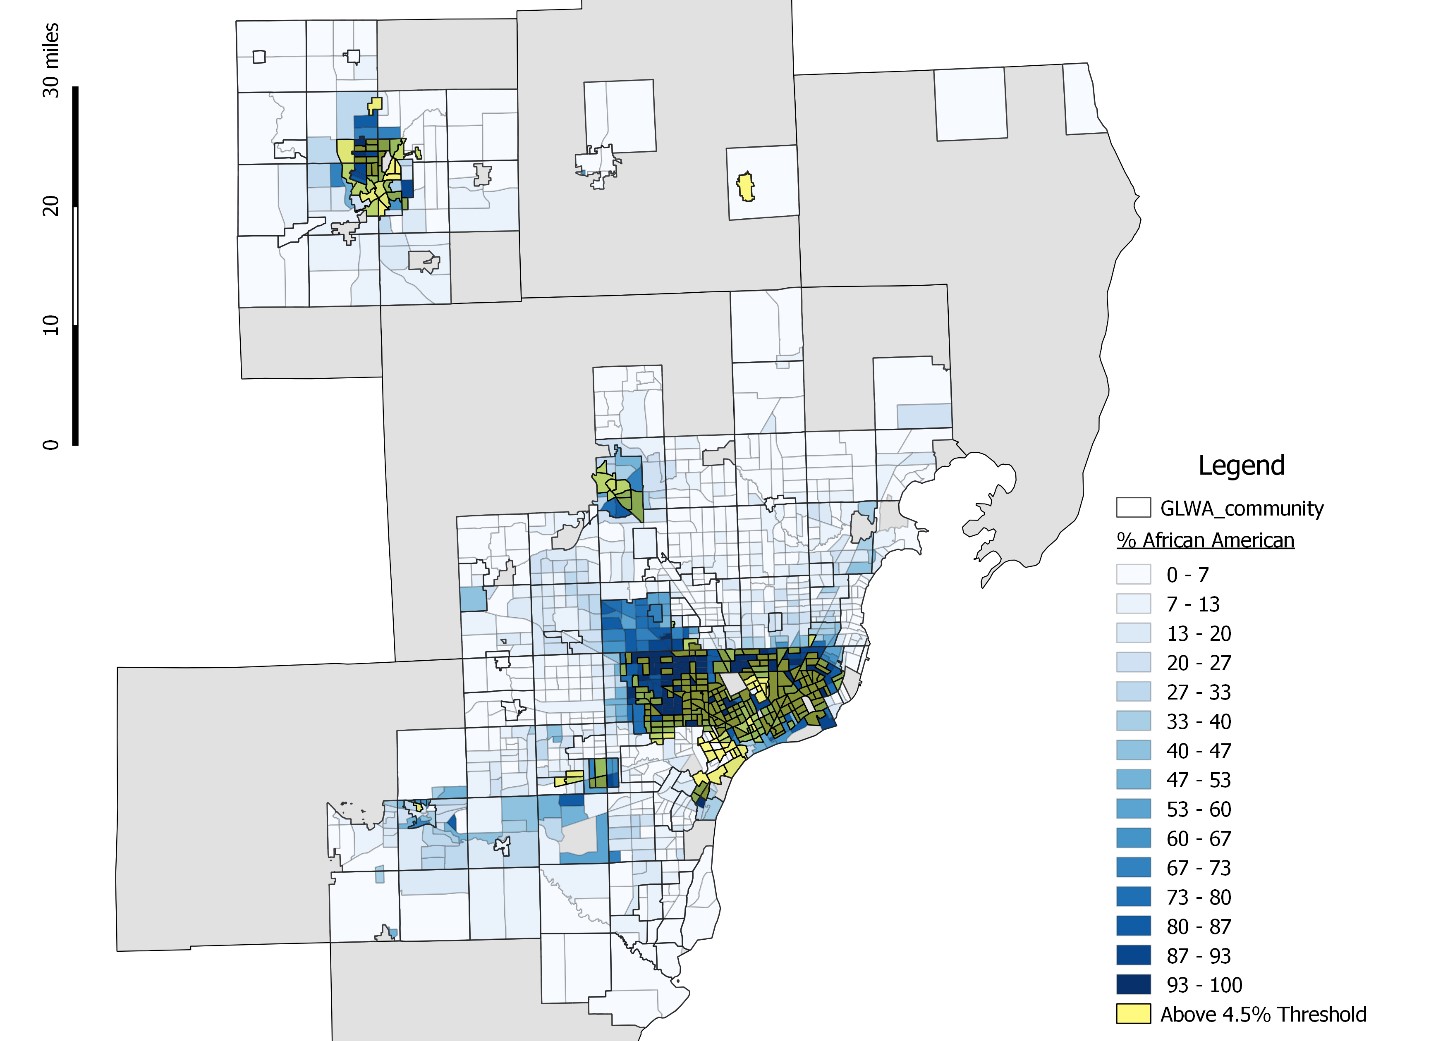 Measuring Water and Sewer Service Affordability | Othering & Belonging ...